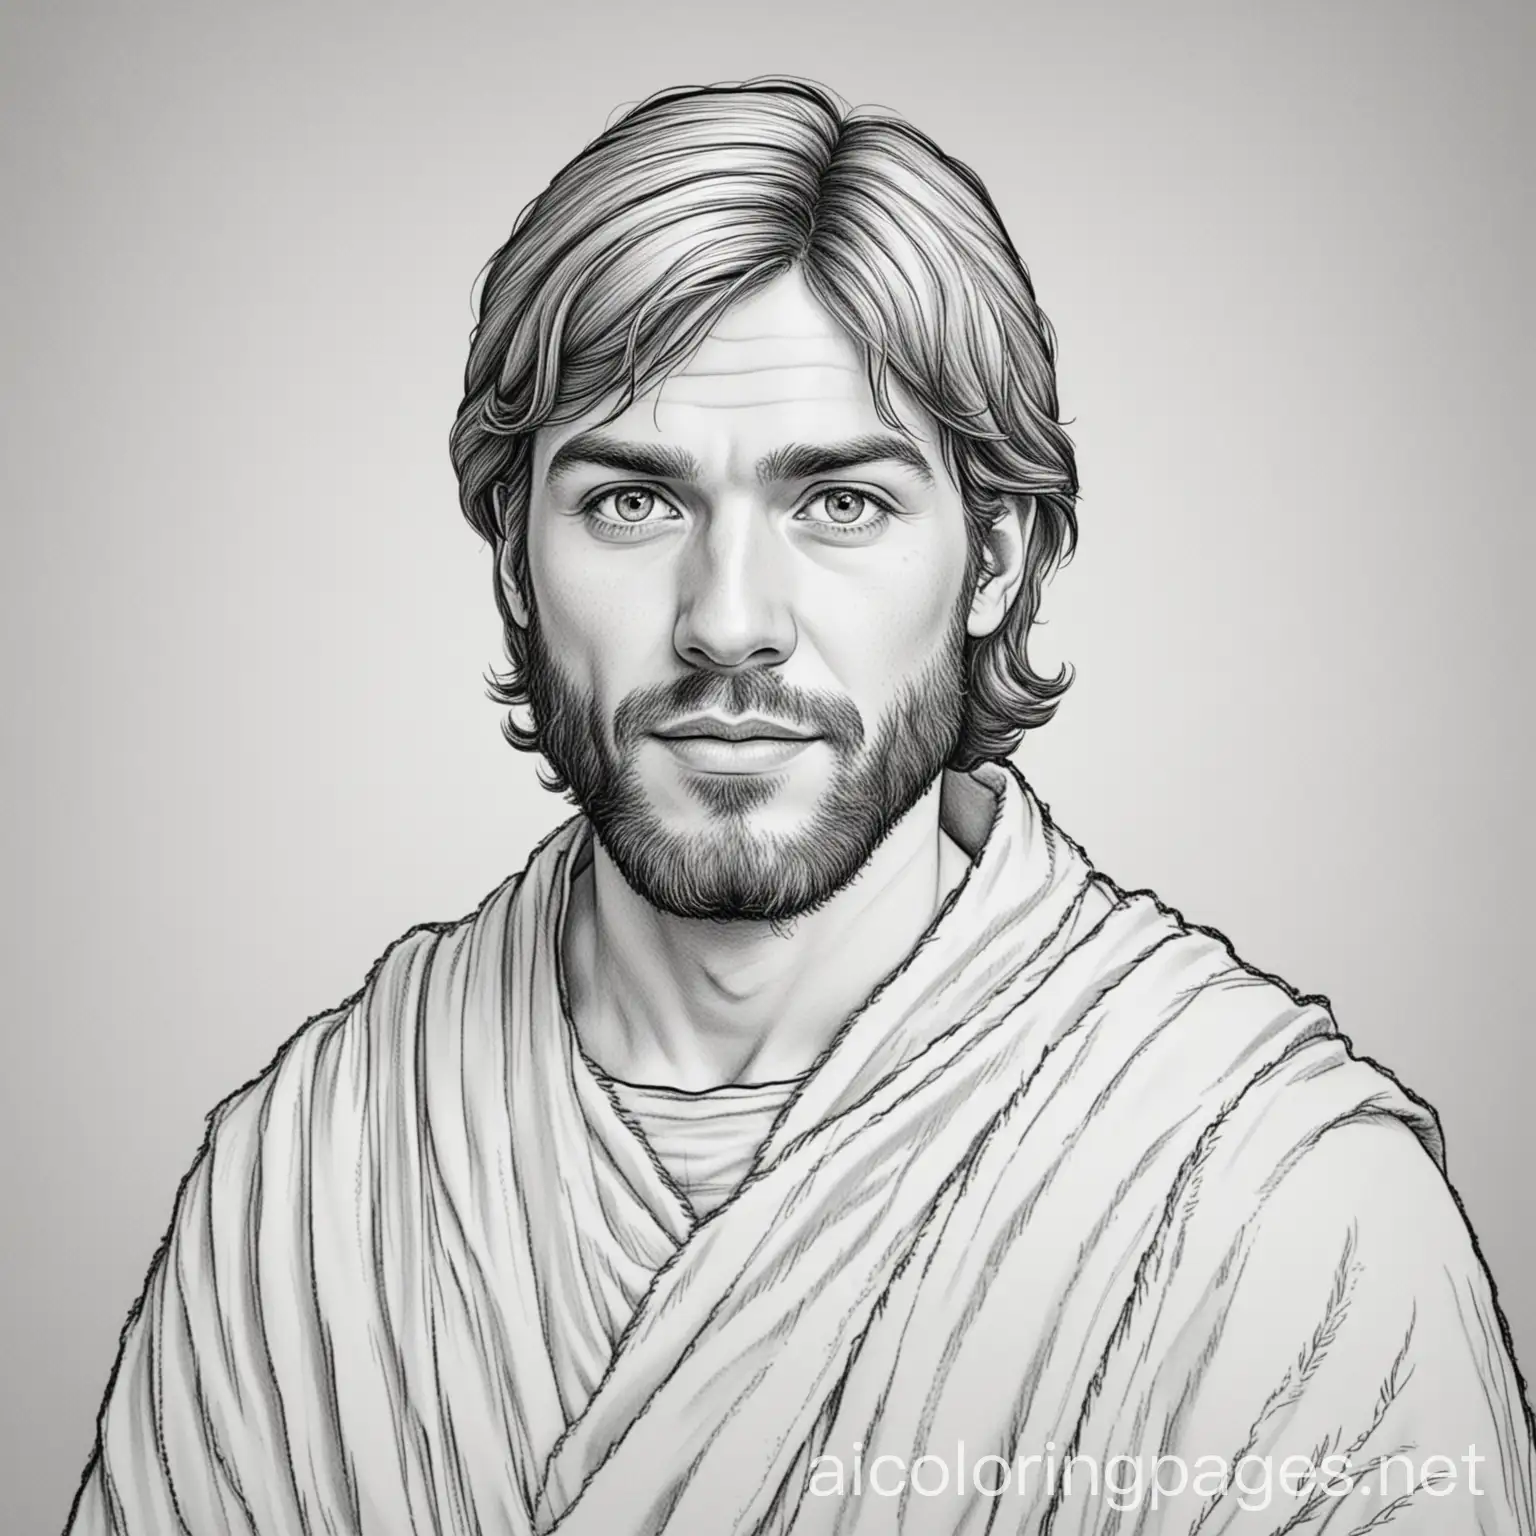 Andrew brother of Peter of the bible black and white no background, Coloring Page, black and white, line art, white background, Simplicity, Ample White Space. The background of the coloring page is plain white to make it easy for young children to color within the lines. The outlines of all the subjects are easy to distinguish, making it simple for kids to color without too much difficulty